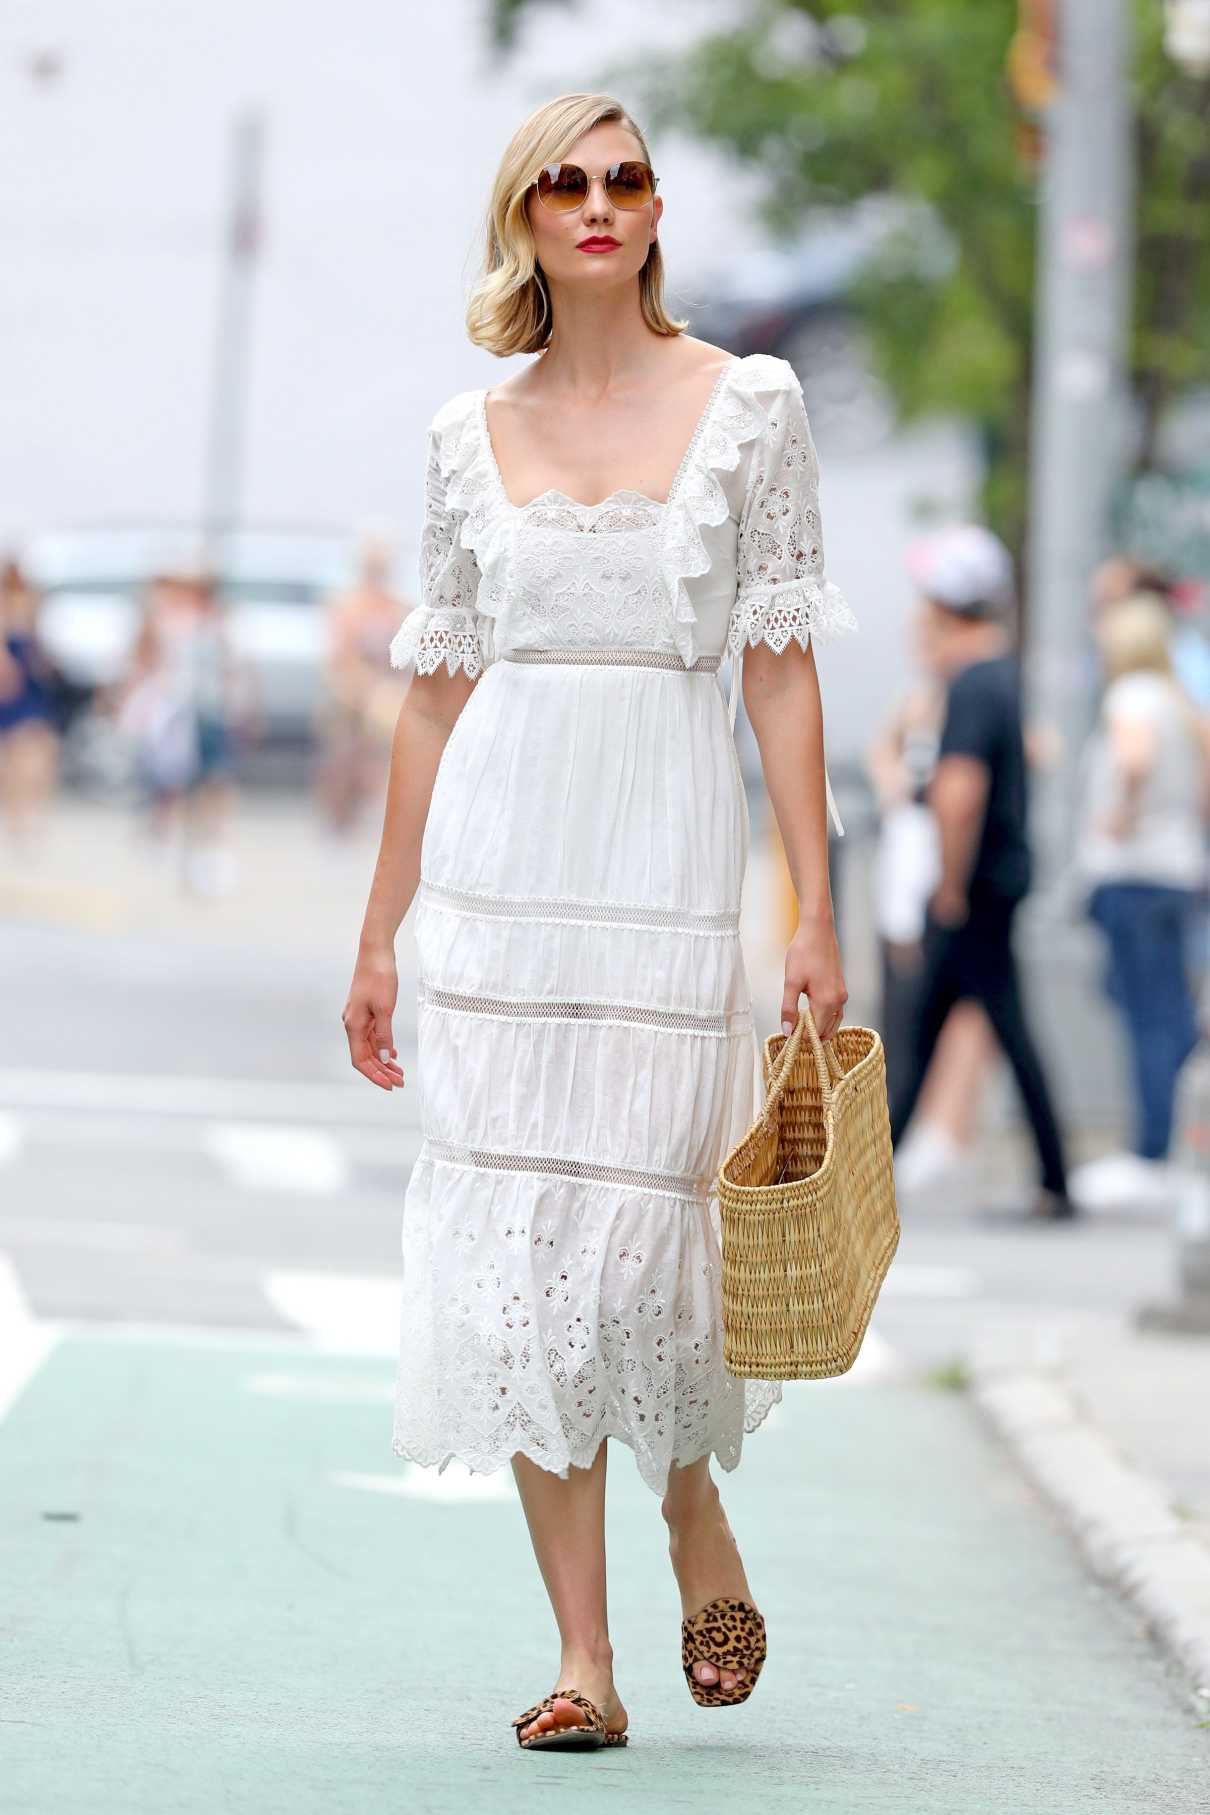 Karlie Kloss in a White Summer Lace Dress Was Seen Out in NYC 06/16 ...